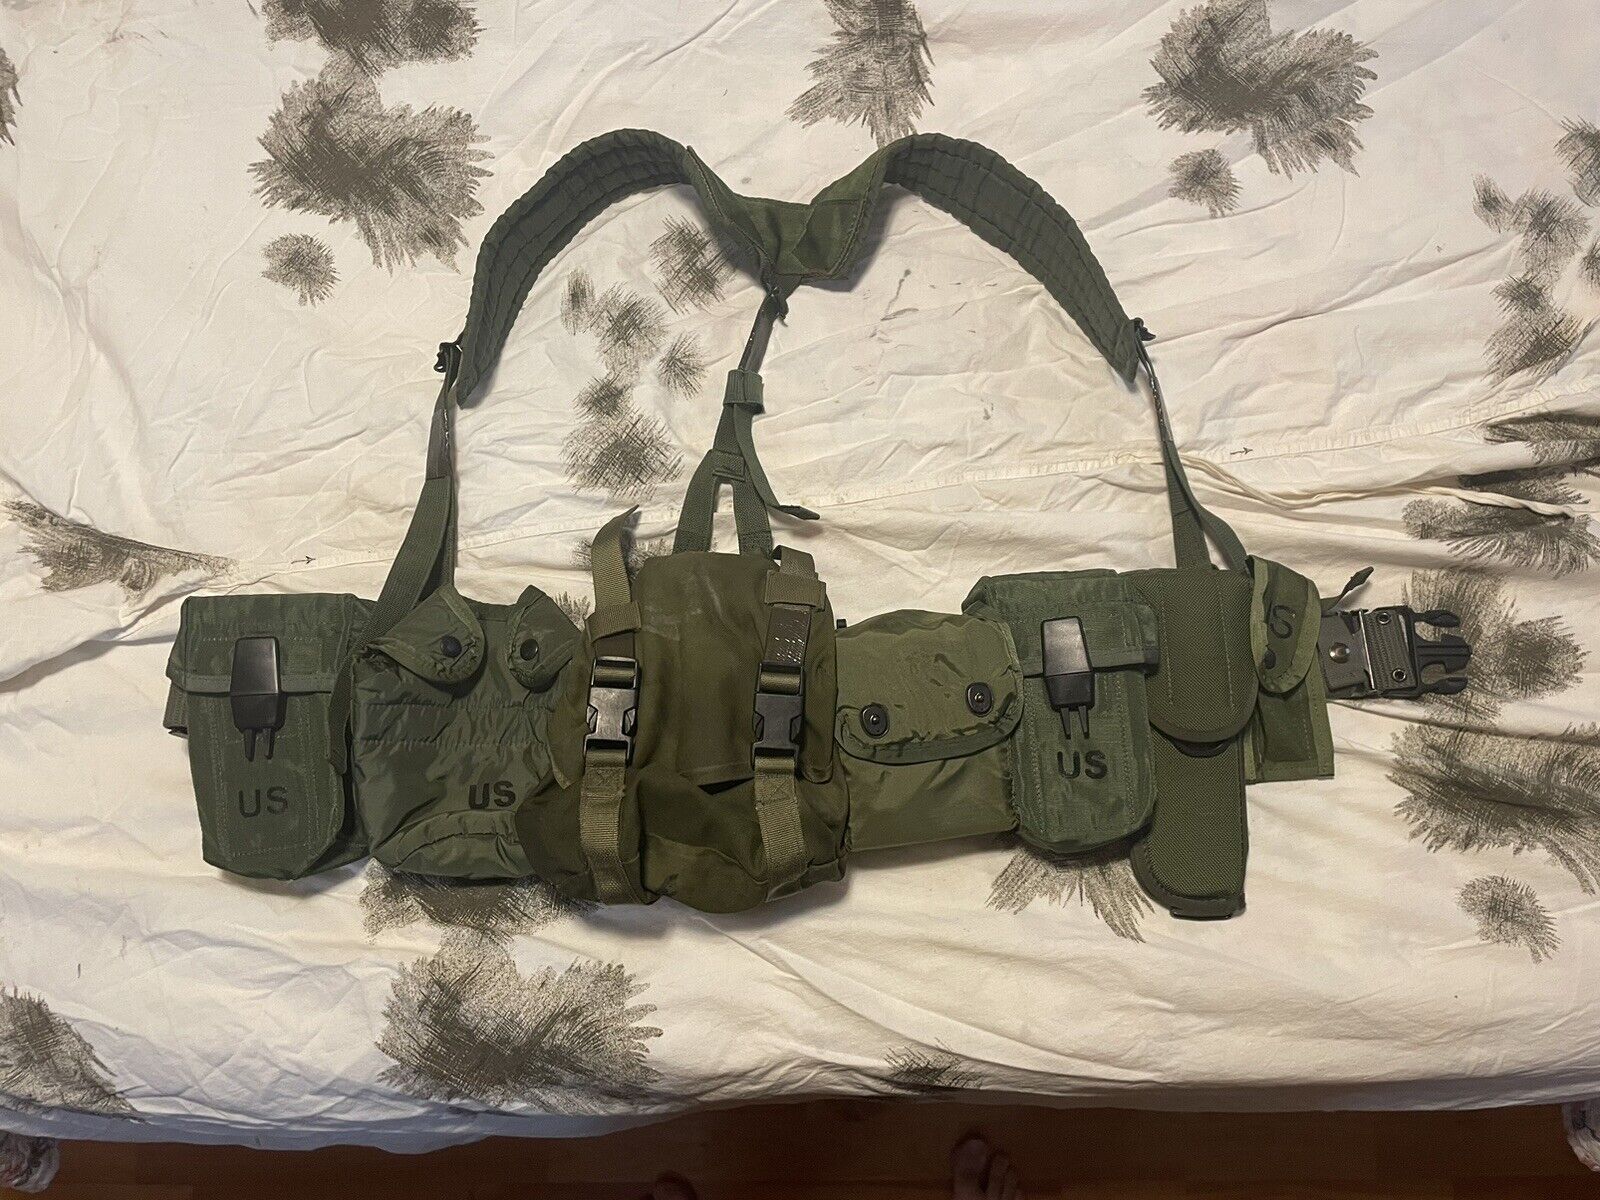 US Military Alice Field Gear Web Belt Suspenders Ammo Pouches Canteen Medium Set